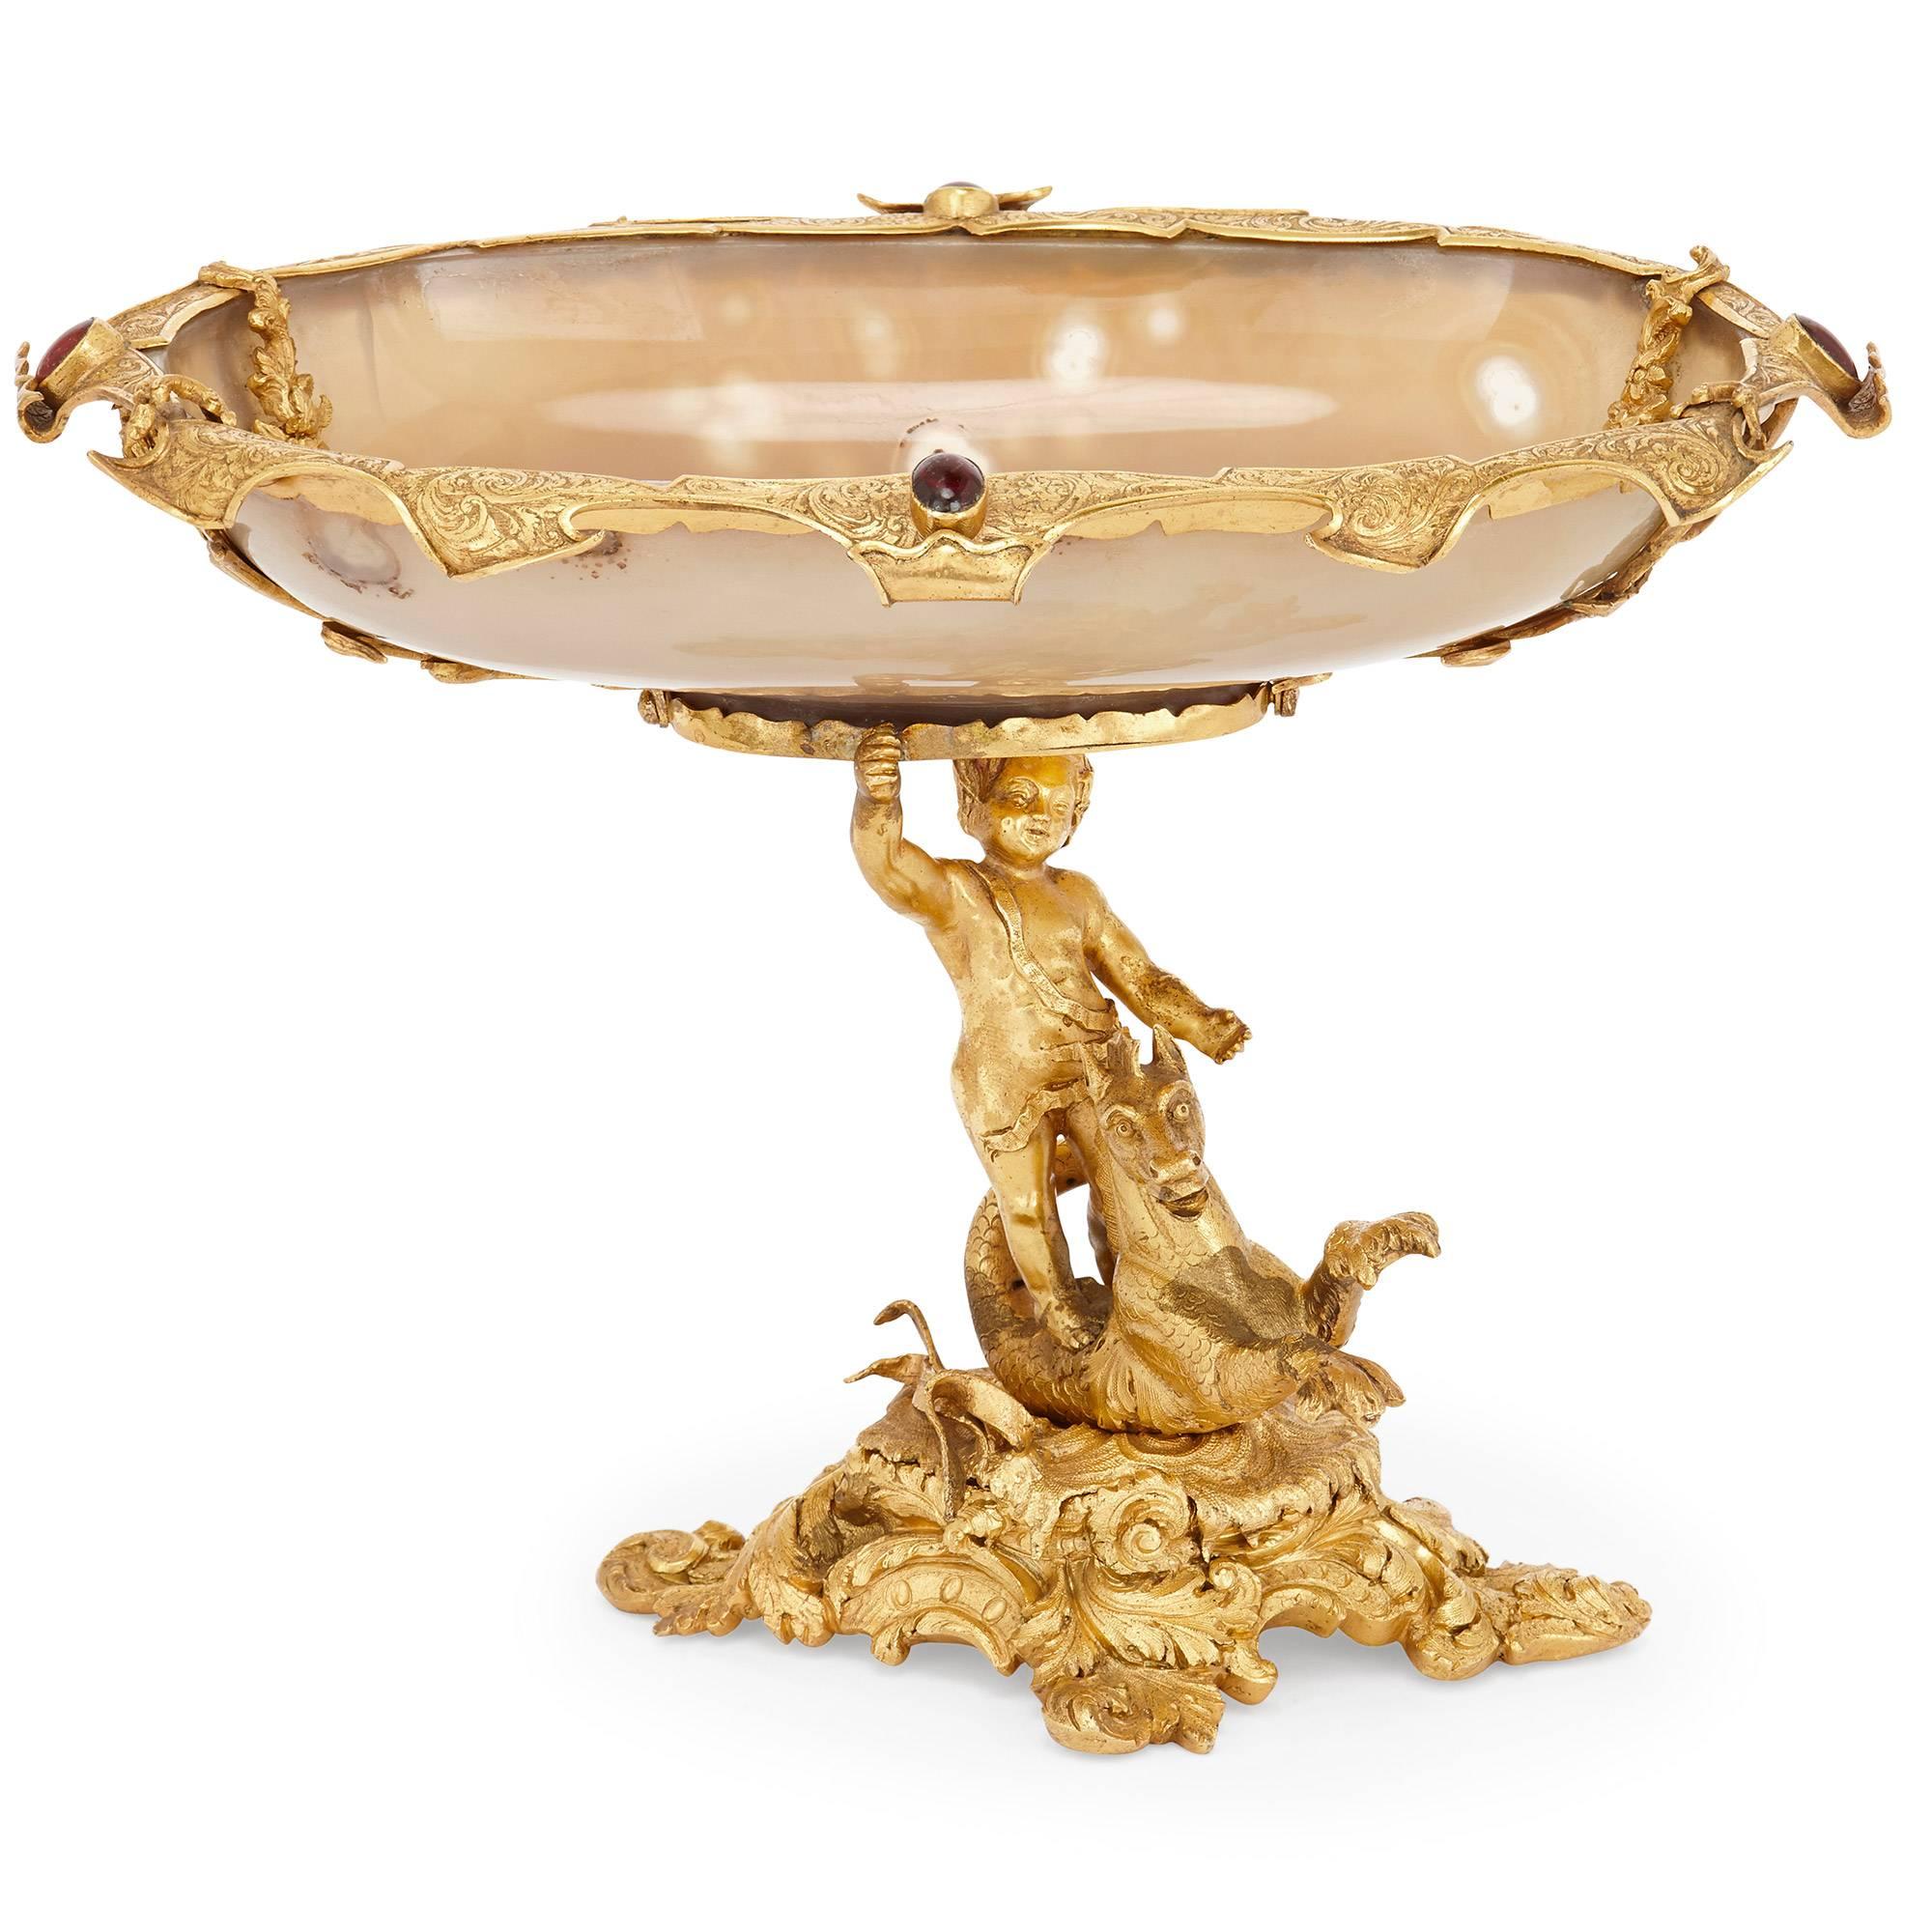 This fine antique centrepiece tazza is beautifully modeled in ormolu and agate. It features an ormolu boy standing on a Hippocampus; all set on naturalistic base with ormolu framed agate bowl above. The Hippocampus is a mythical creature, descending